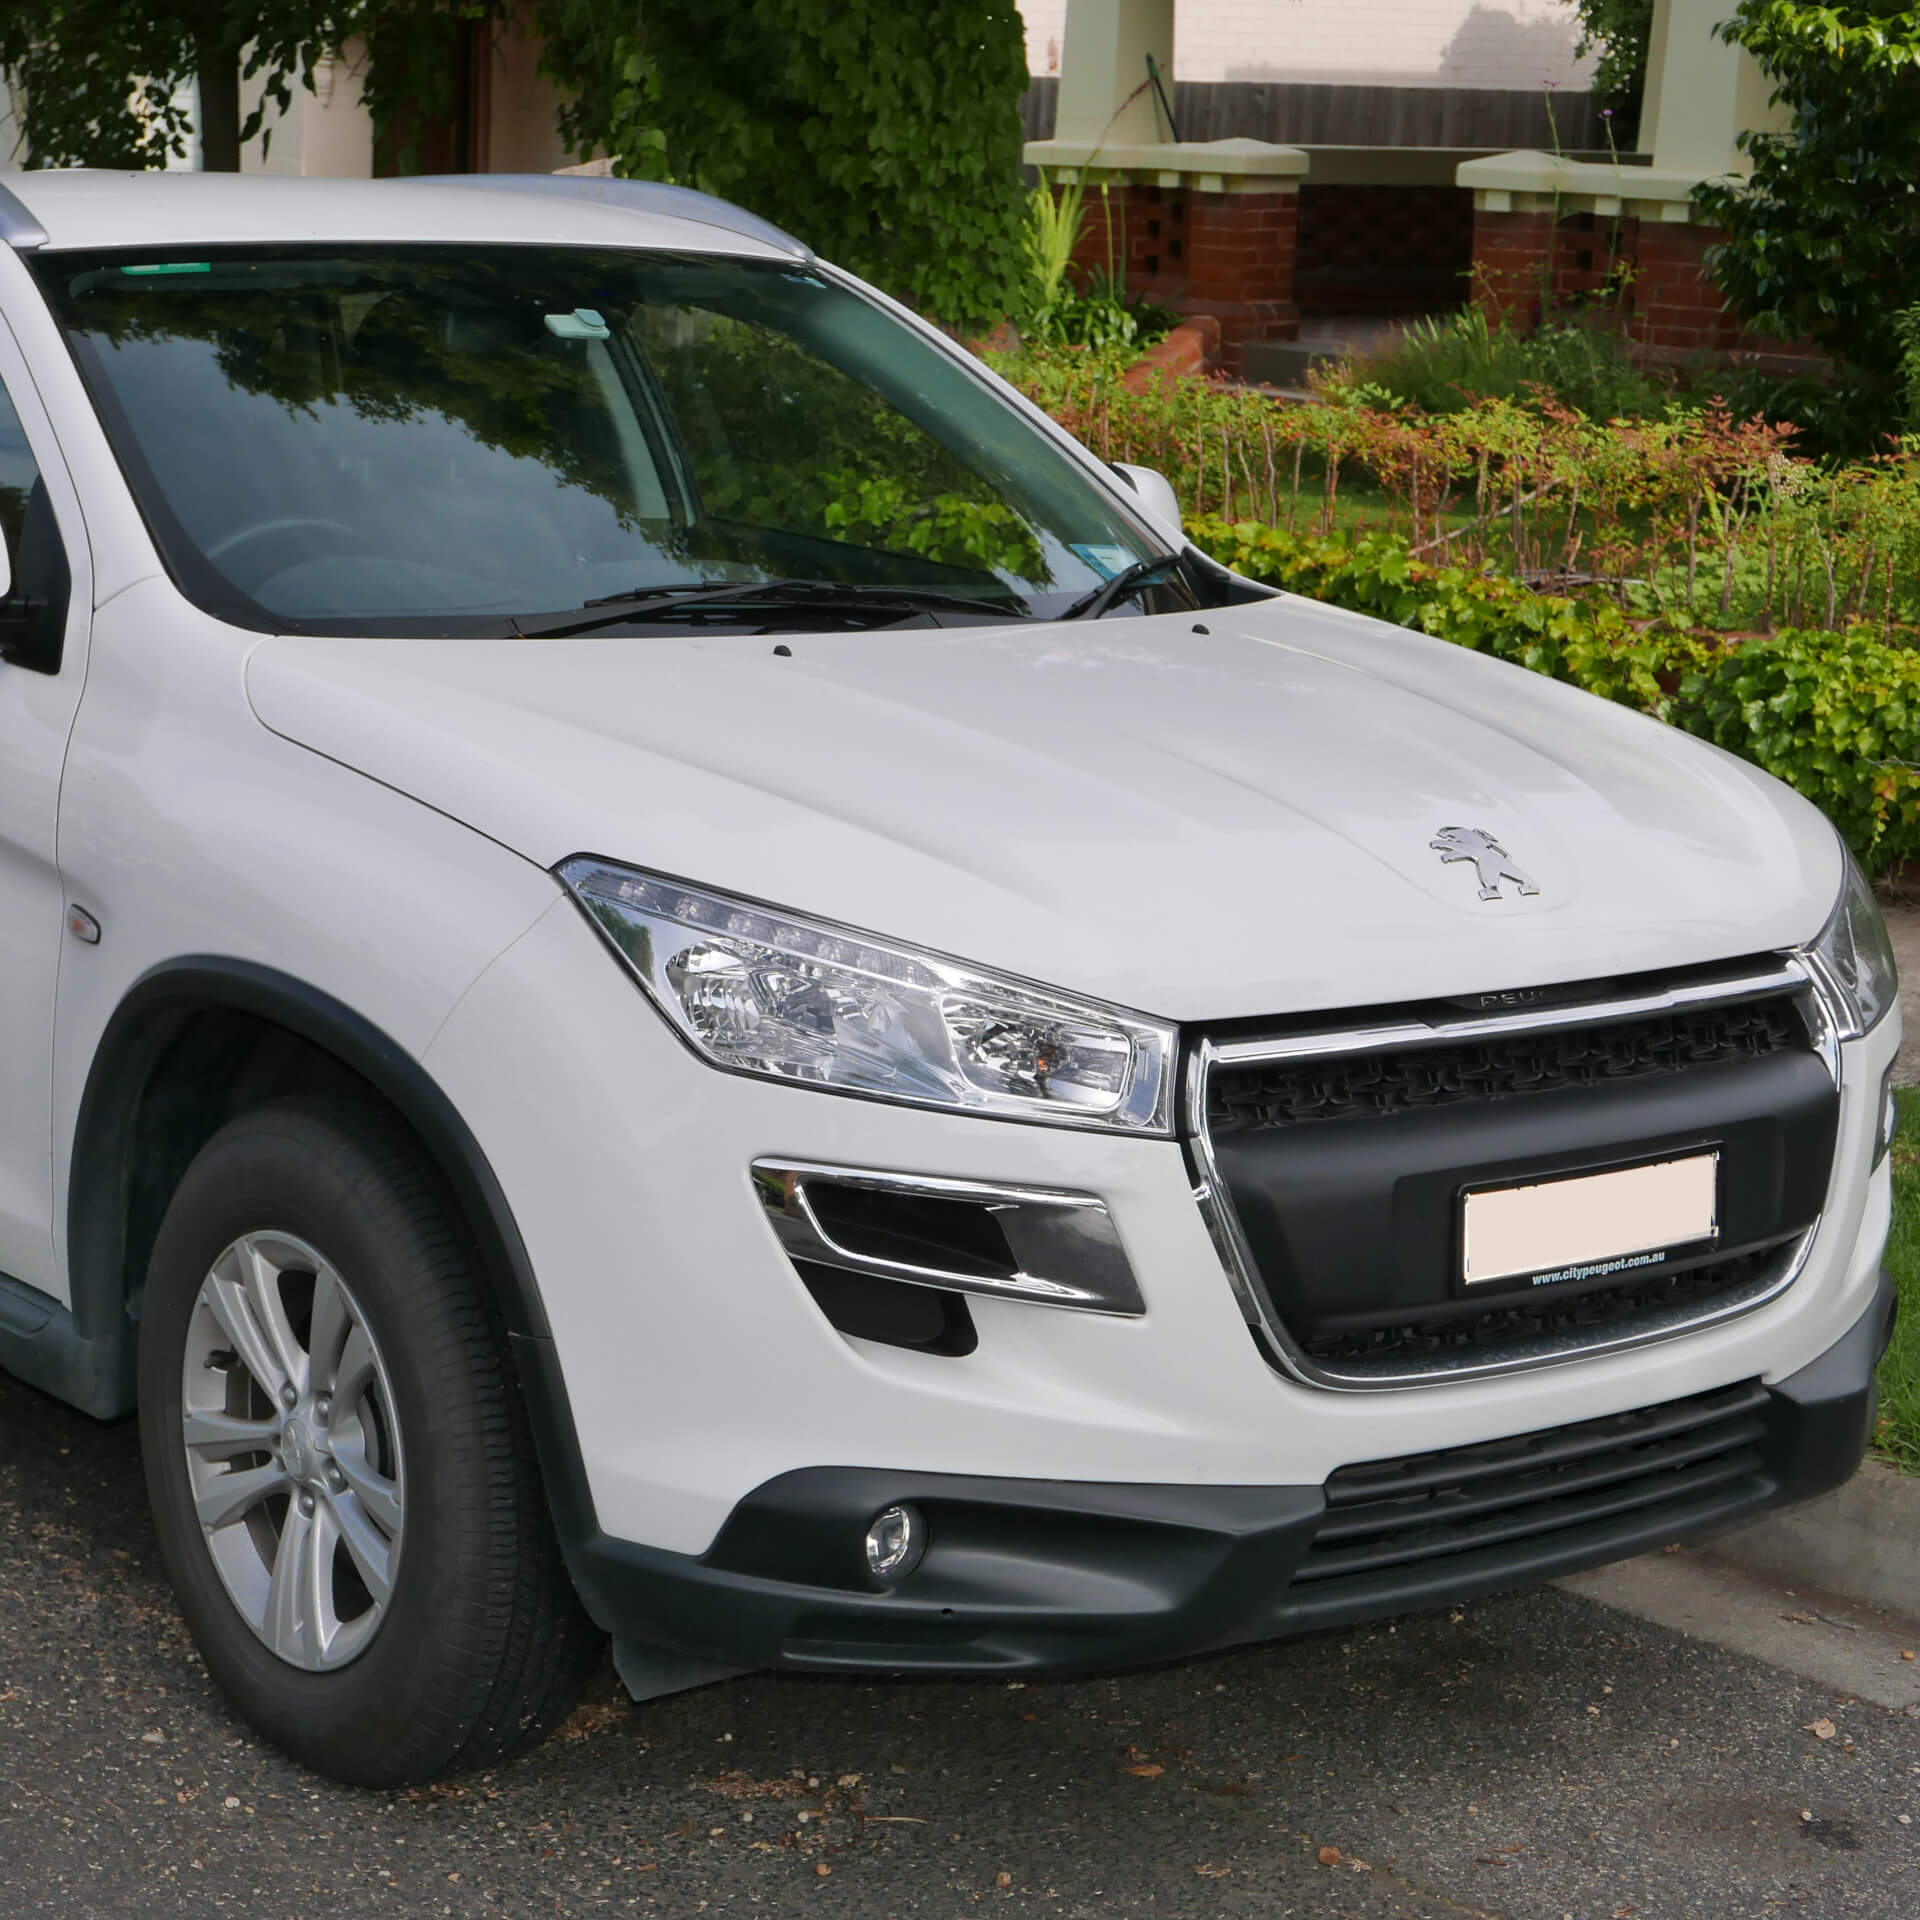 Direct4x4 accessories for Peugeot 4008 vehicles with a photo of the front of a white Peugeot 4008 parked by a kerb